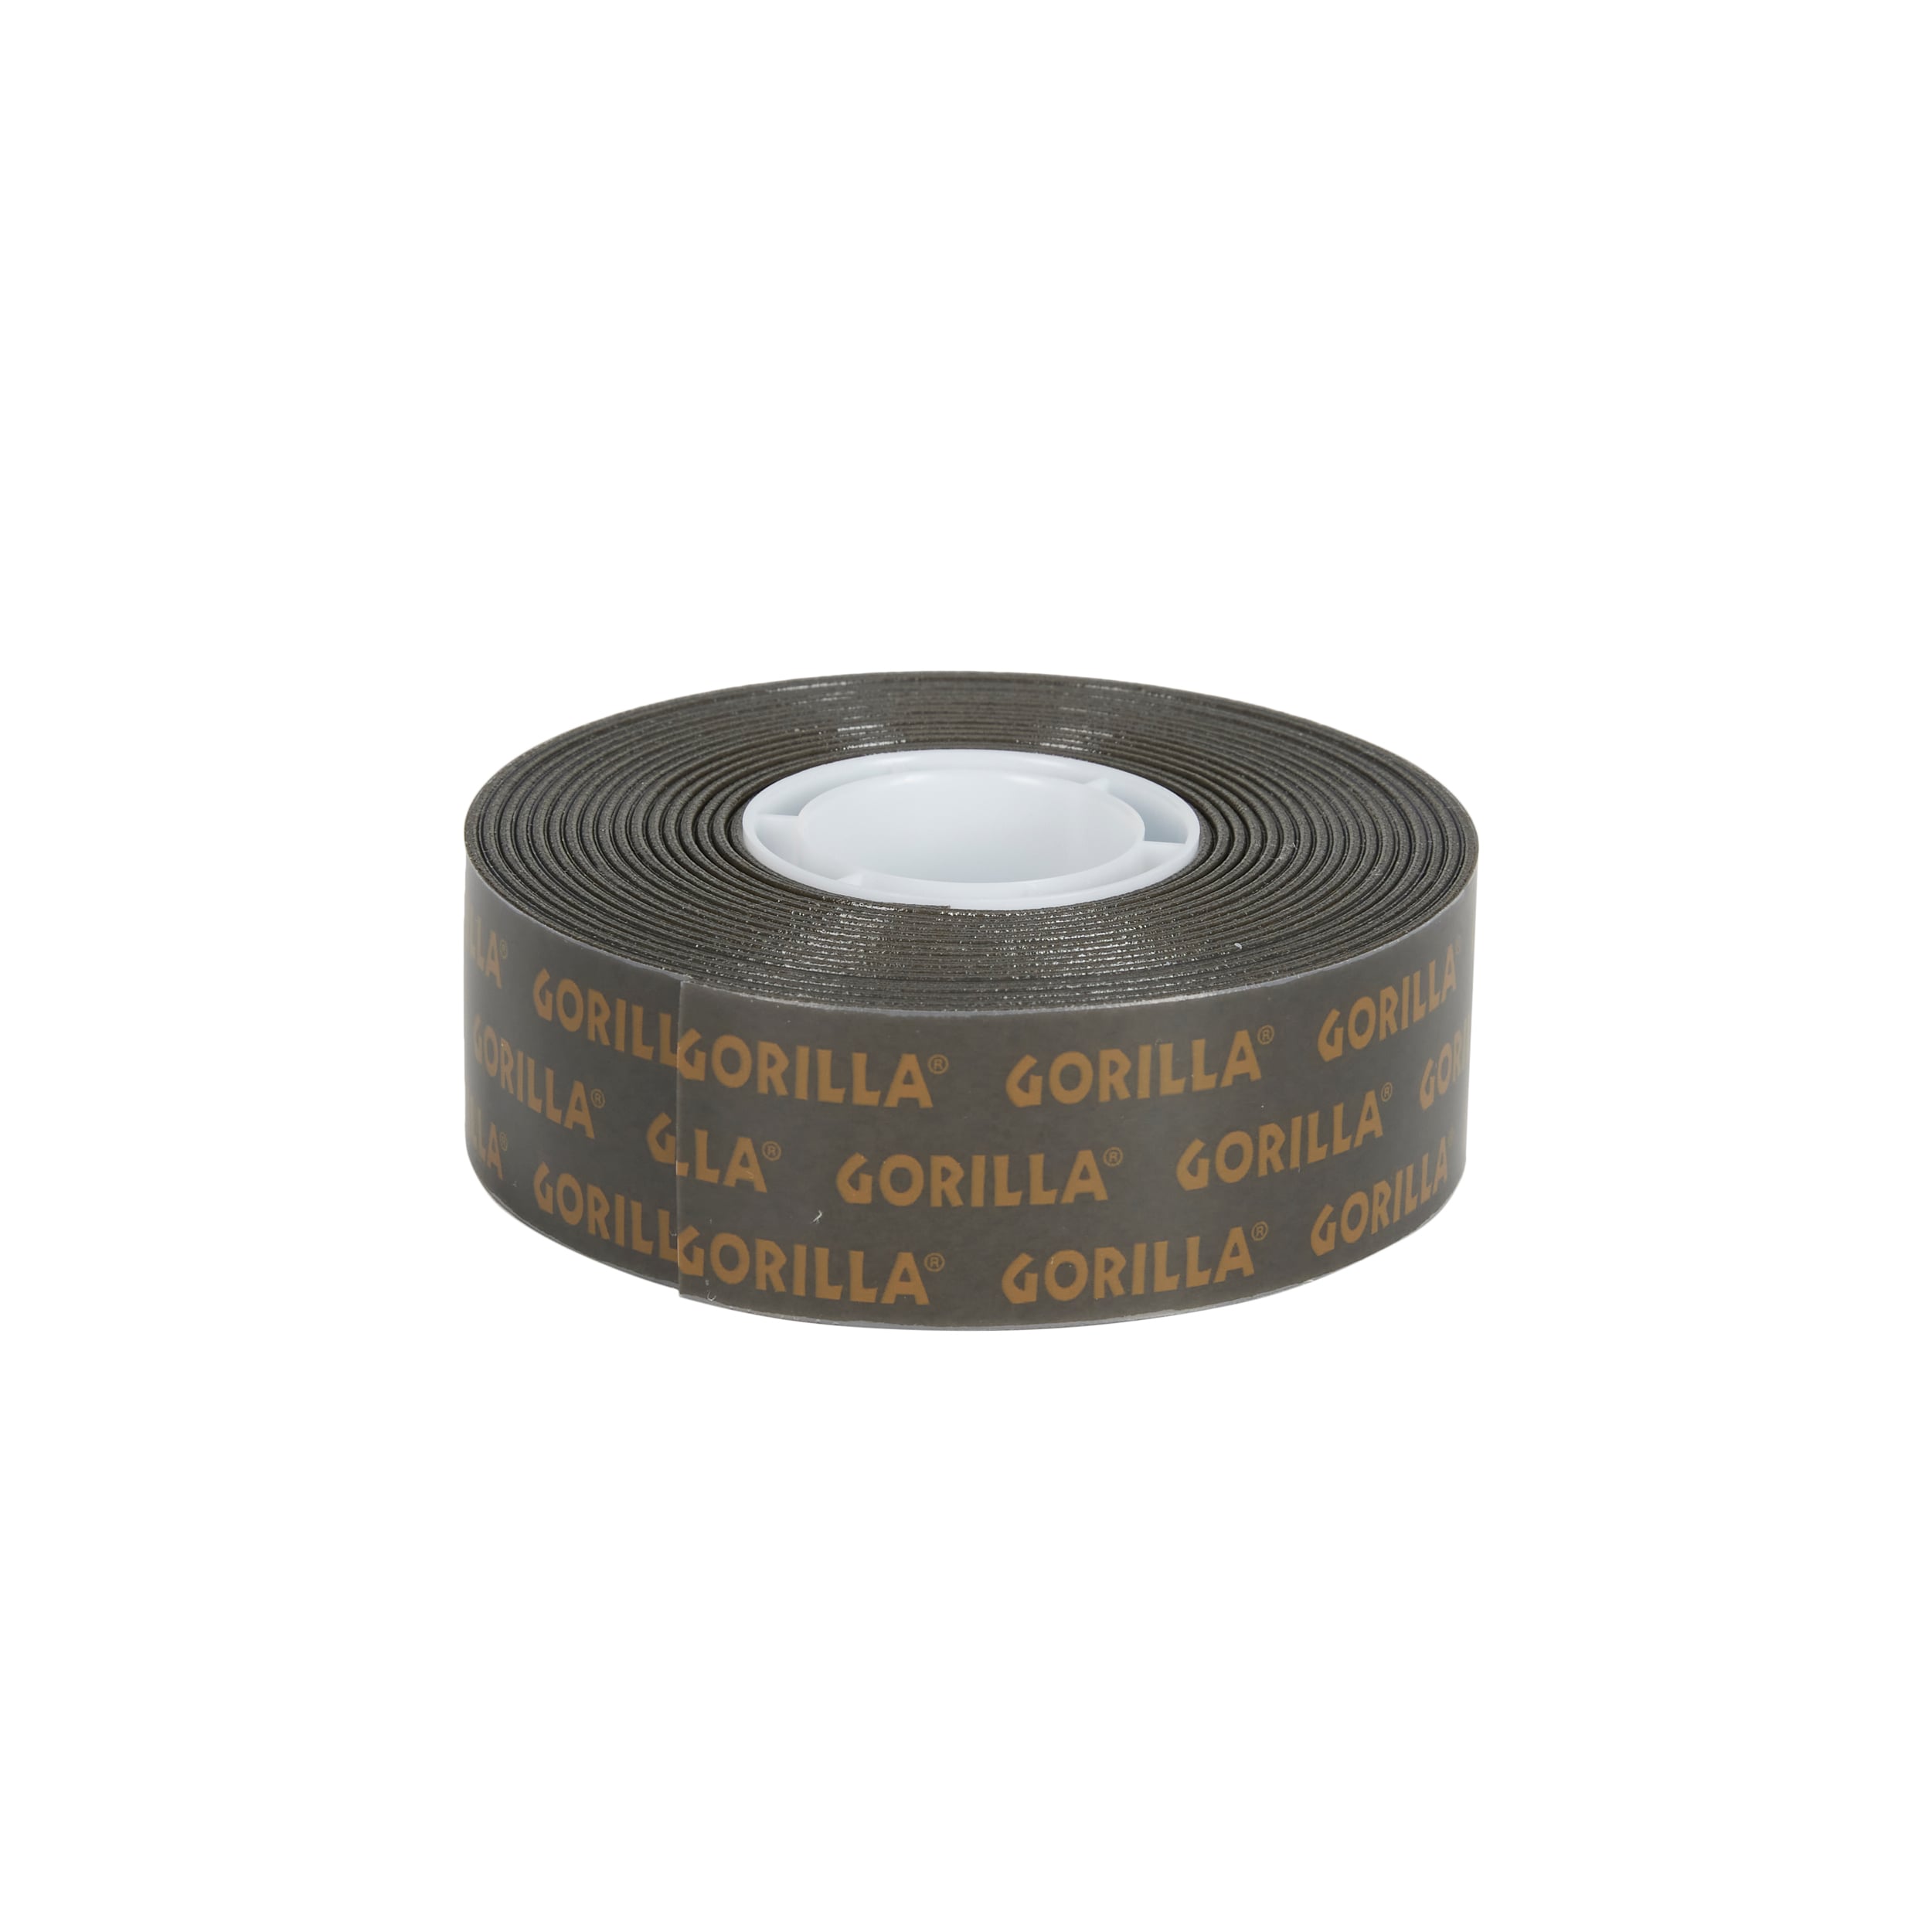 Gorilla Heavy Duty Mounting Tape 1-in x 120 Yard(s) Double-Sided Tape in  the Double-Sided Mounting Tape department at